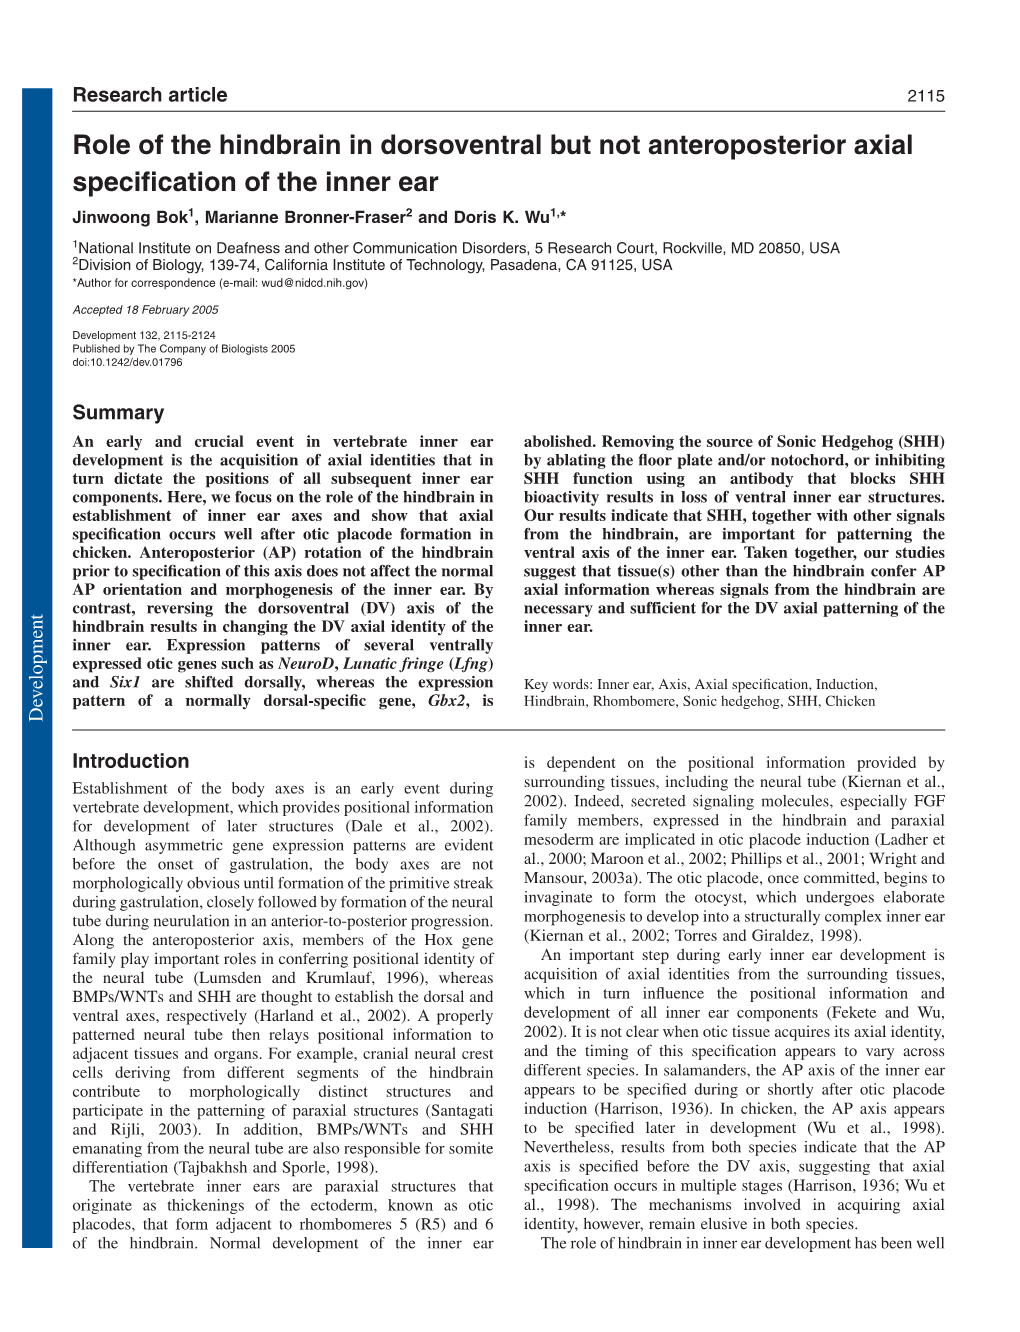 Role of the Hindbrain in Dorsoventral but Not Anteroposterior Axial Speciﬁcation of the Inner Ear Jinwoong Bok1, Marianne Bronner-Fraser2 and Doris K